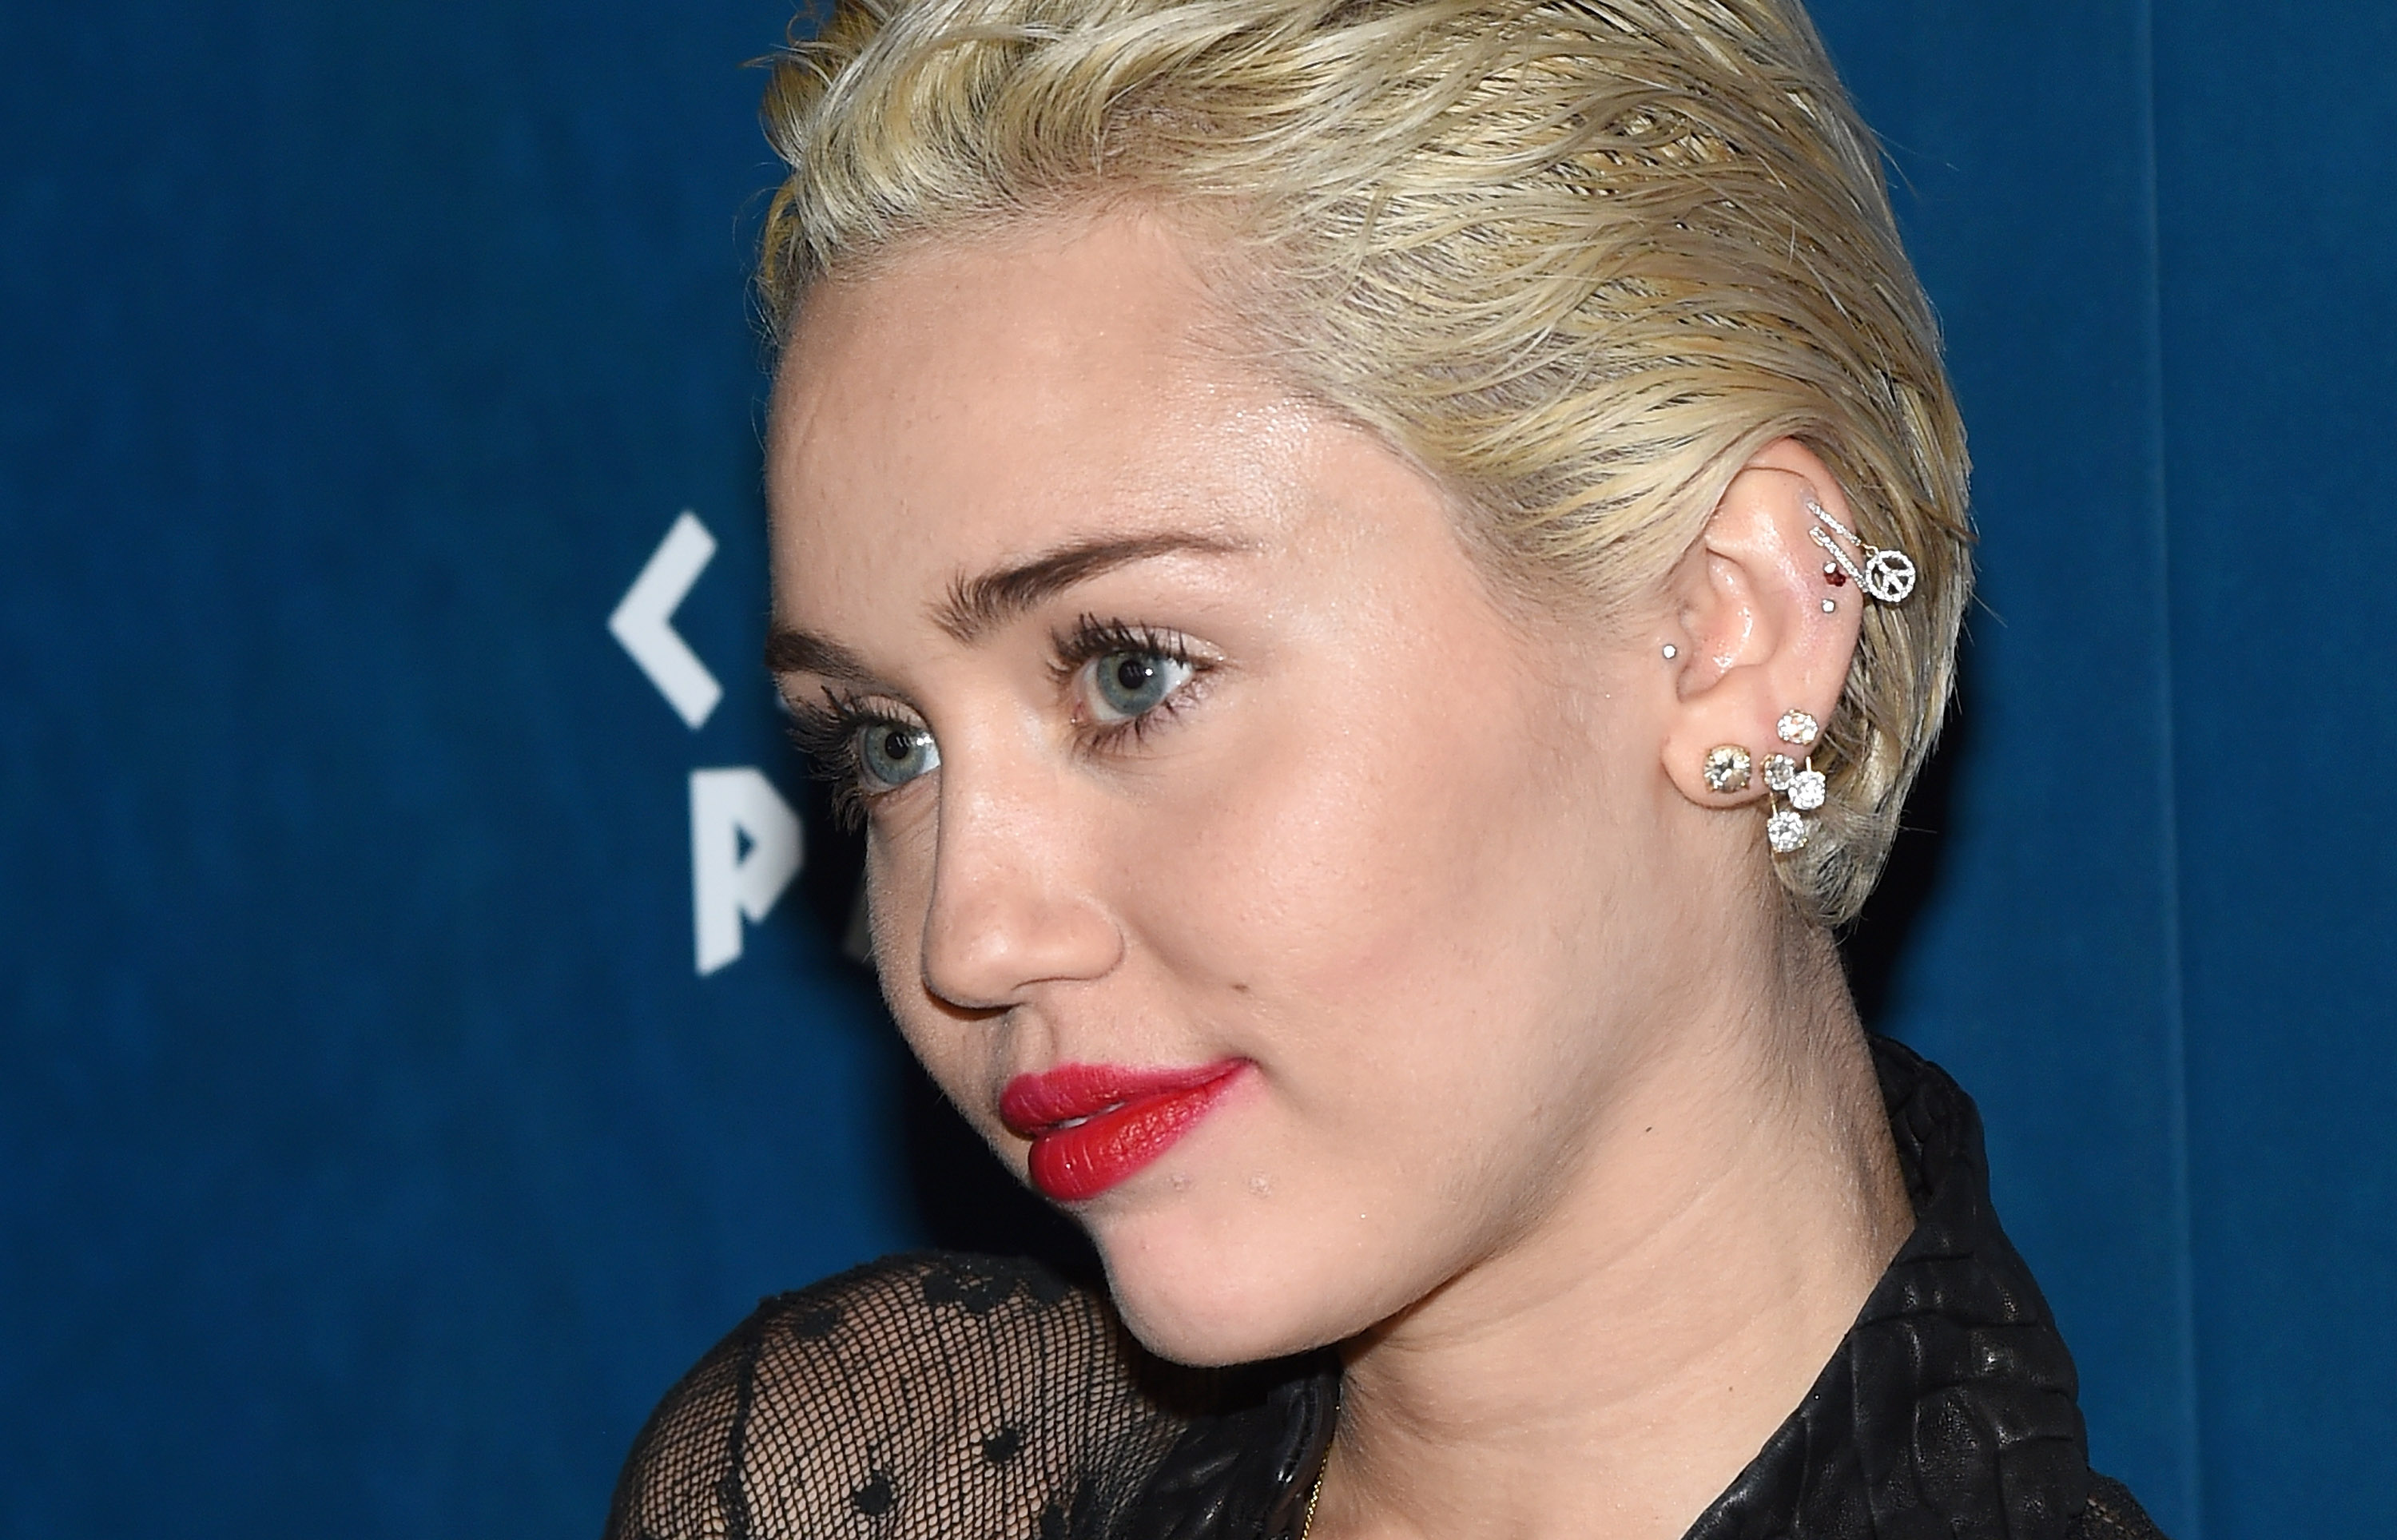 Entertainer Miley Cyrus makes an appearance at Omnia Nightclub at Caesars Palace on March 22, 2015 in Las Vegas.